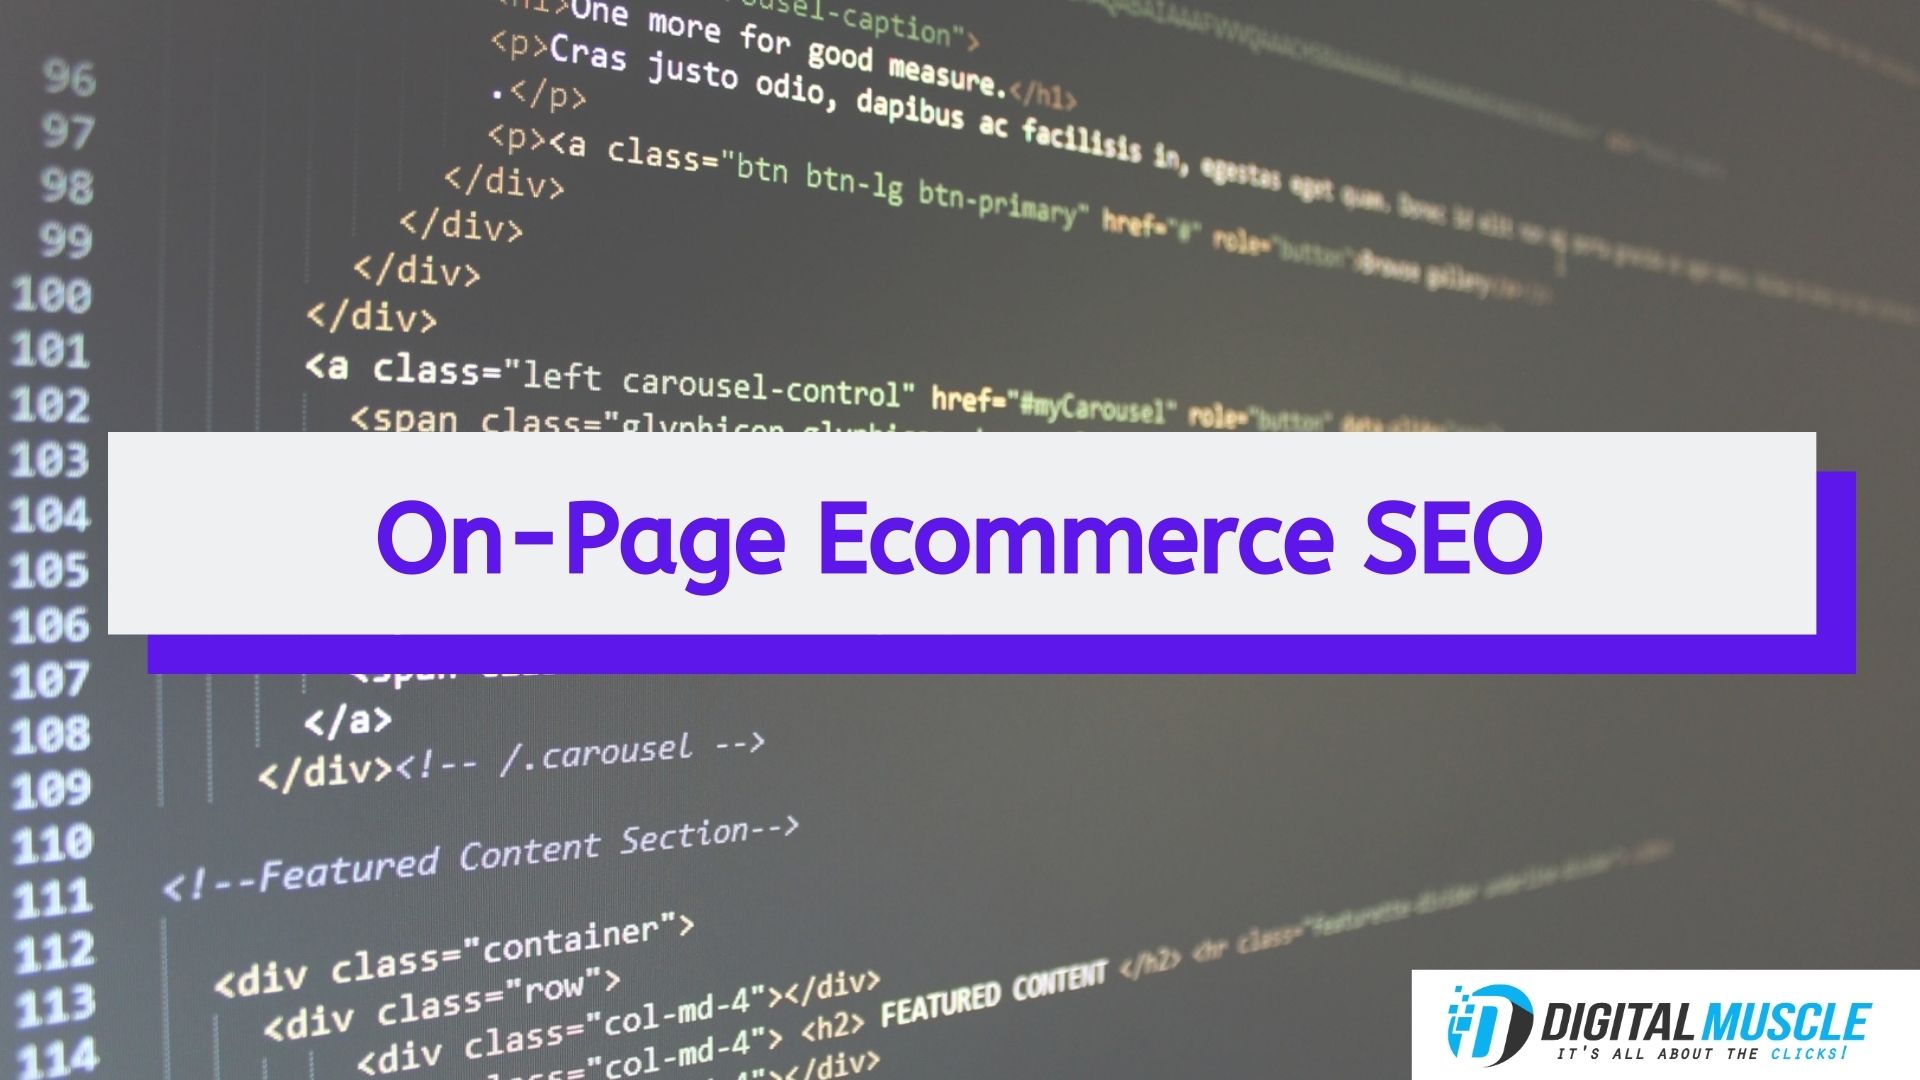 On-Page Ecommerce SEO